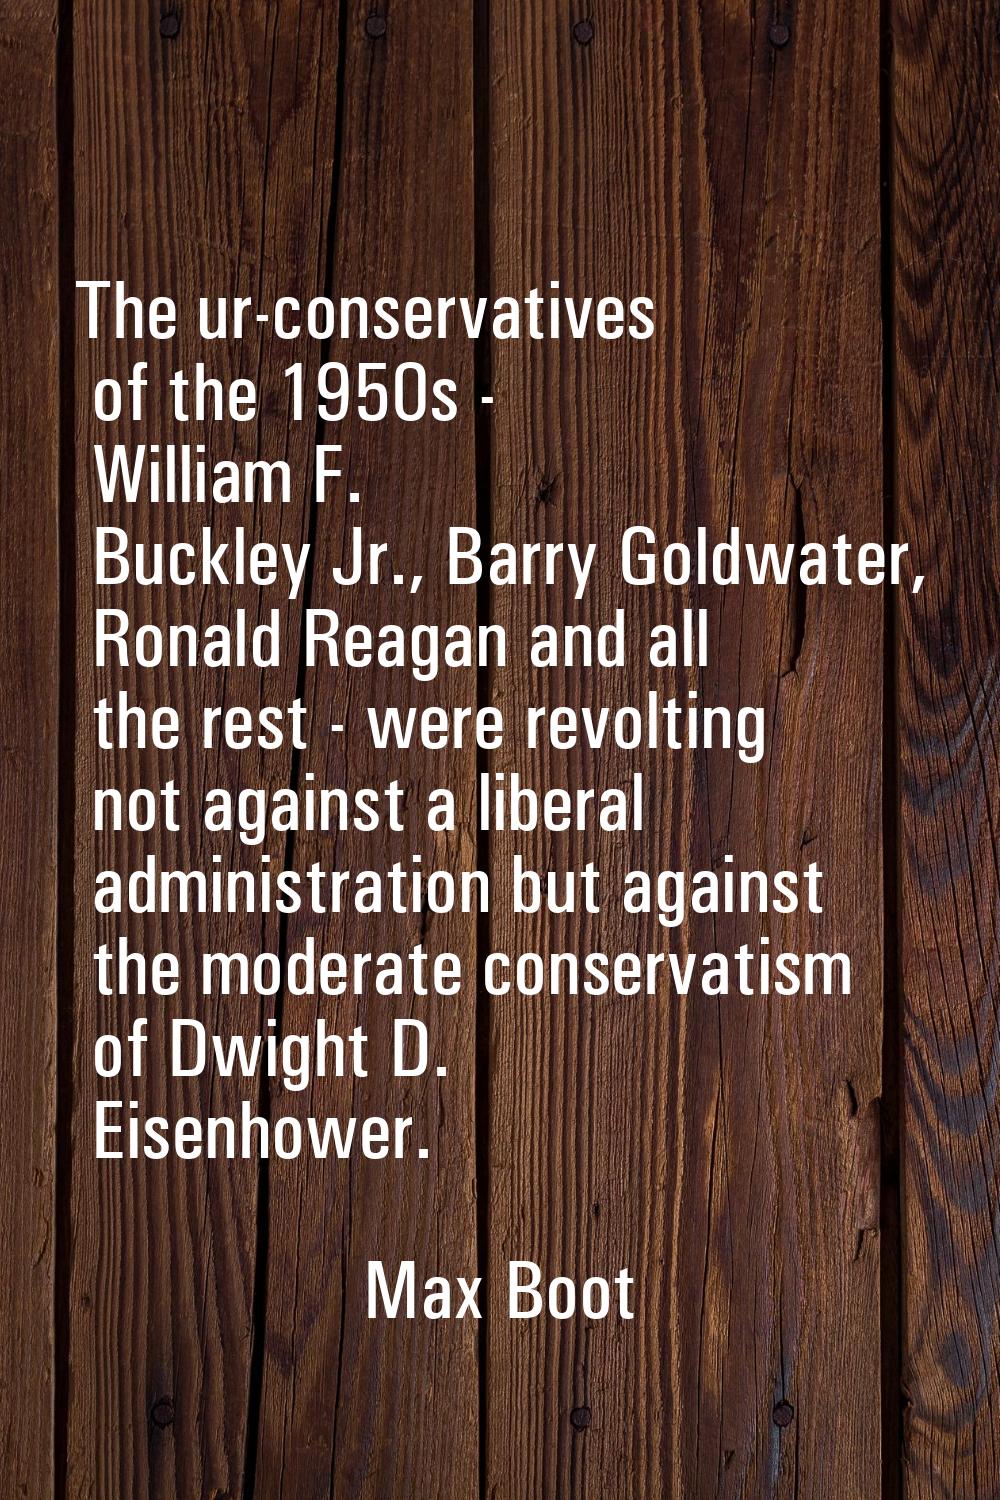 The ur-conservatives of the 1950s - William F. Buckley Jr., Barry Goldwater, Ronald Reagan and all 